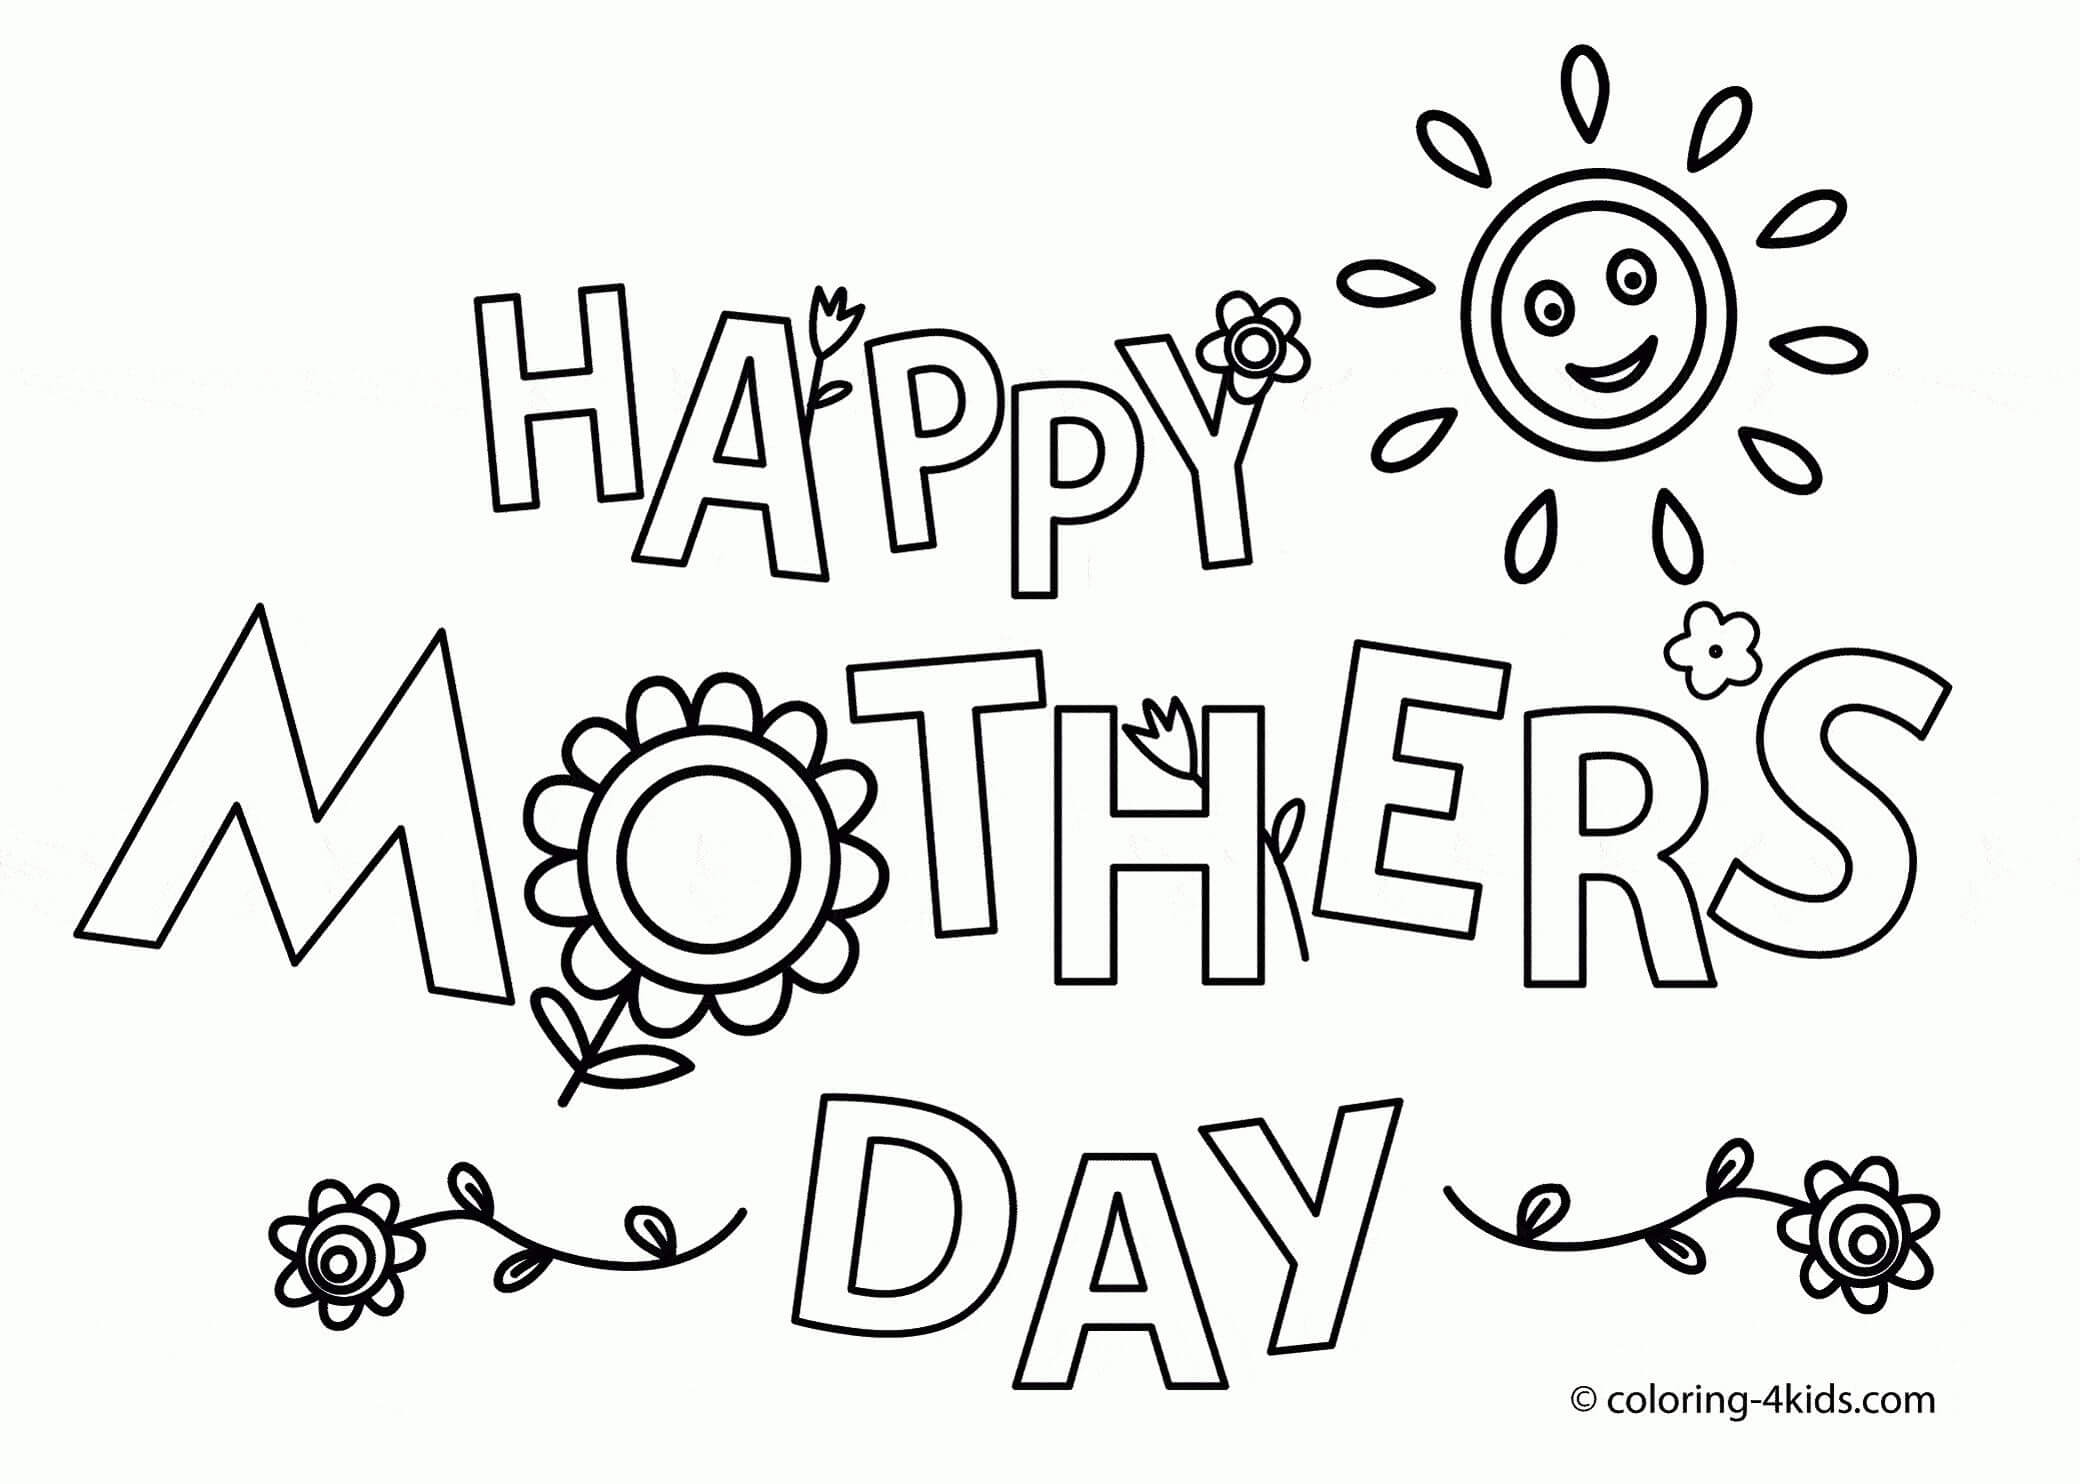 21-printable-mother-s-day-coloring-pages-holiday-vault